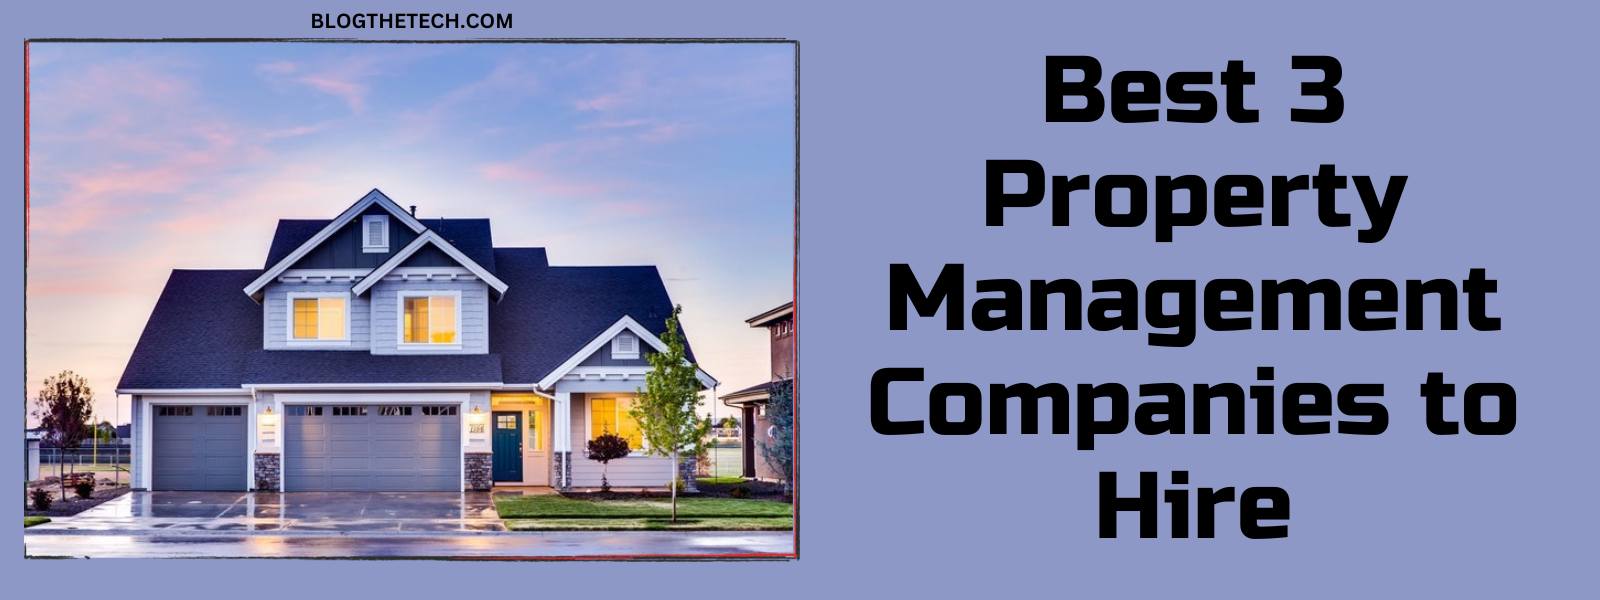 Property Management Companies to Hire-featured